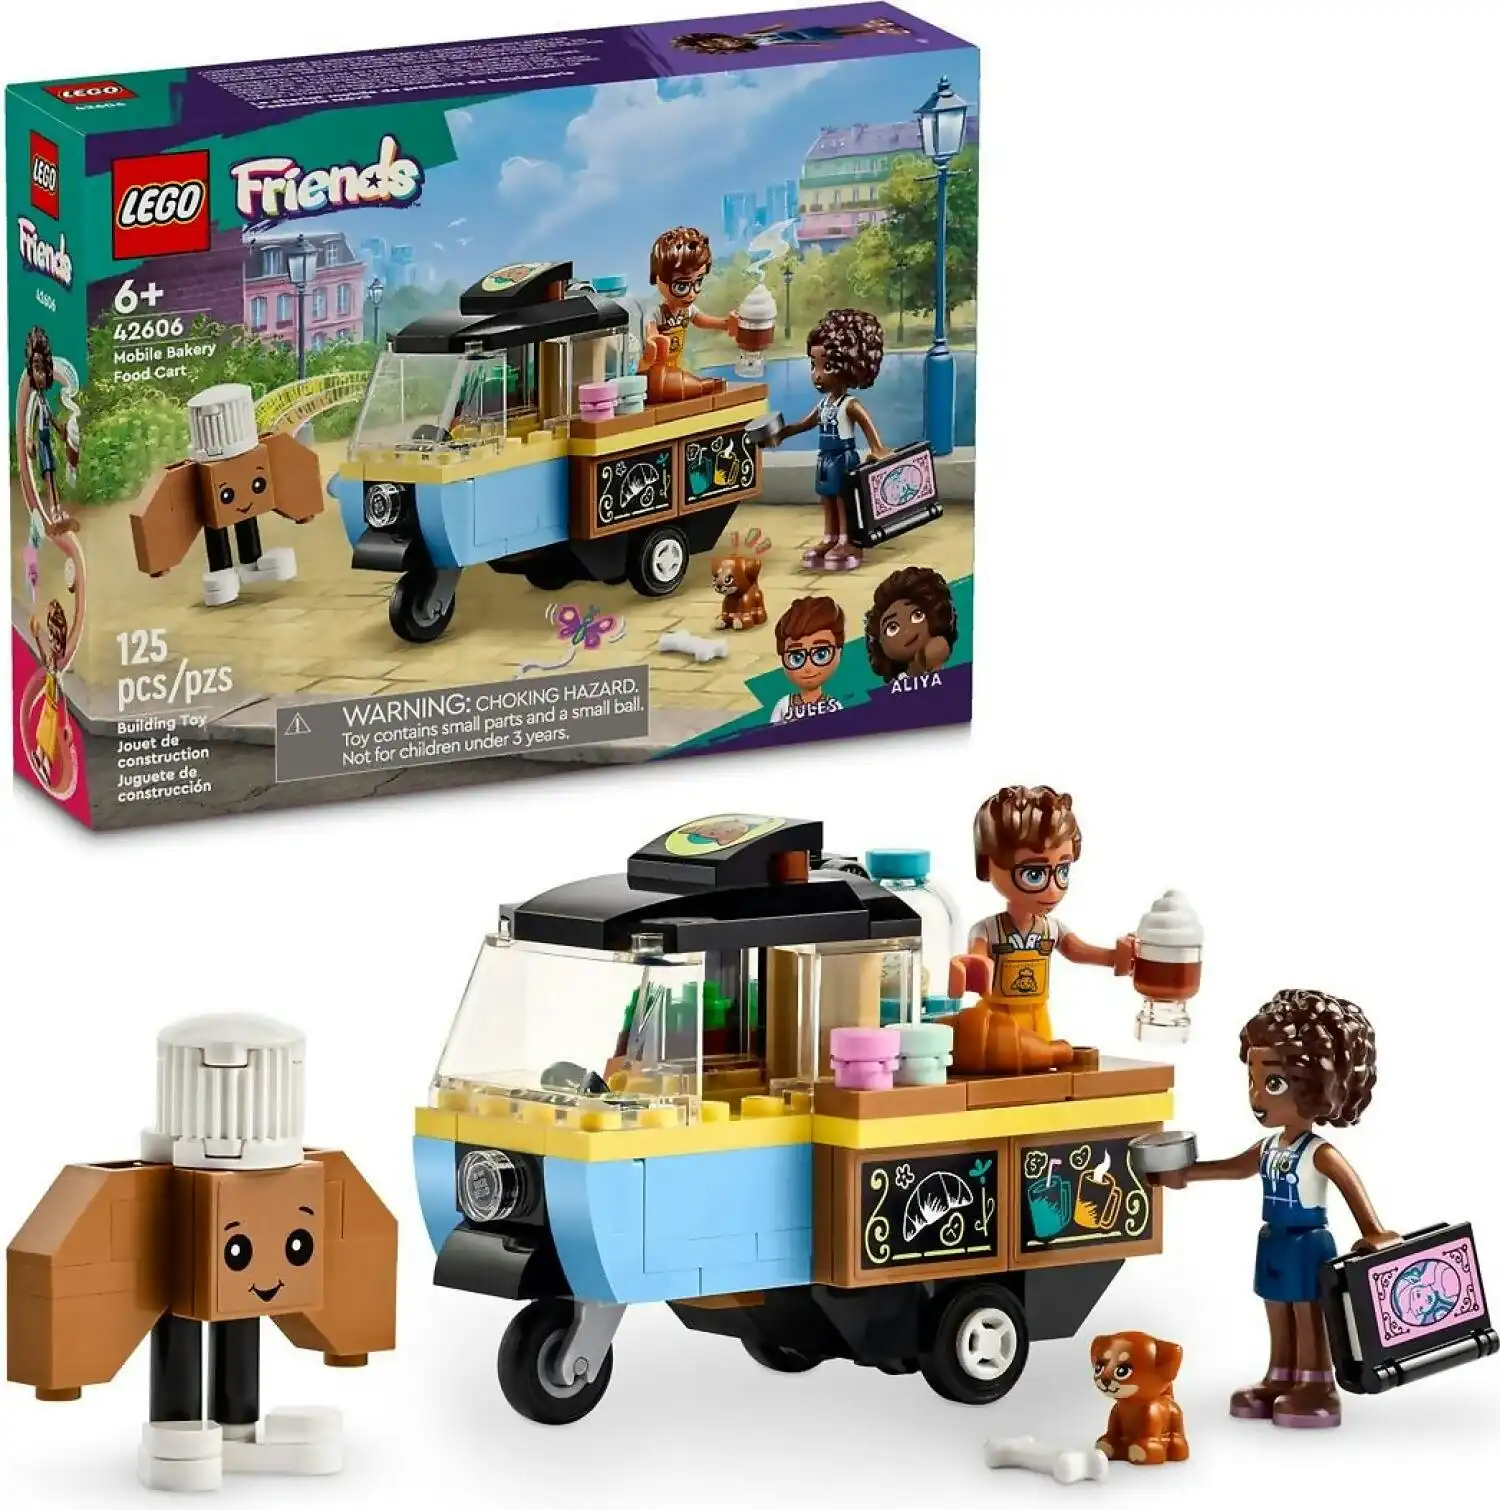 LEGO 42606 Mobile Bakery Food Cart - Friends